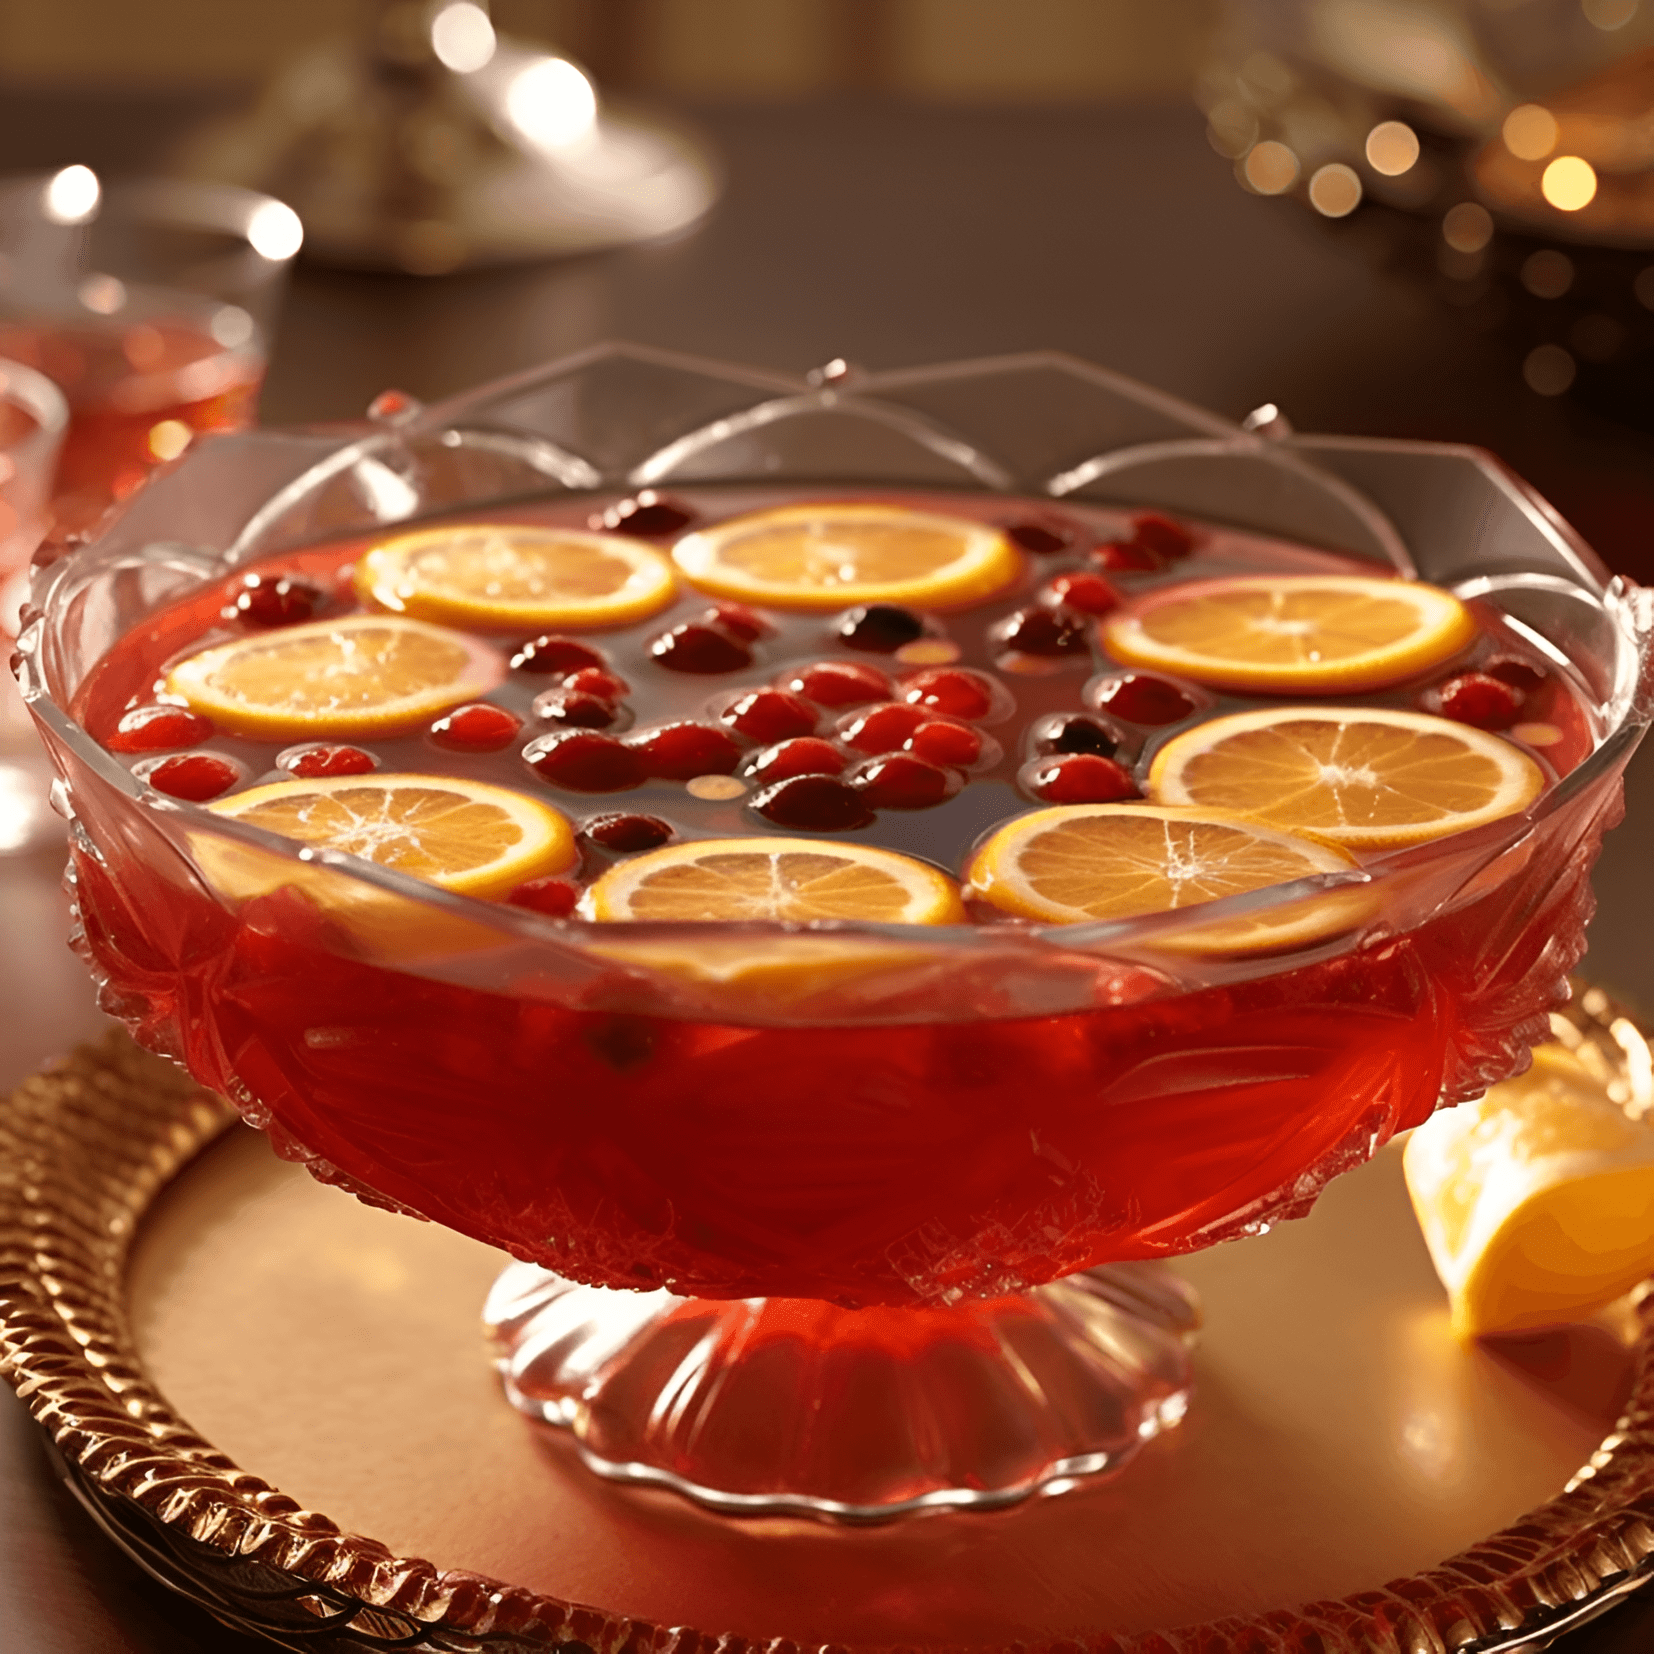 Cranberry Punch Cocktail Recipe - The Cranberry Punch cocktail is a delightful mix of sweet, tart, and tangy flavors. The cranberry juice provides a slightly sour and fruity taste, while the orange juice adds a touch of sweetness and citrusy brightness. The overall flavor is well-balanced, light, and refreshing.